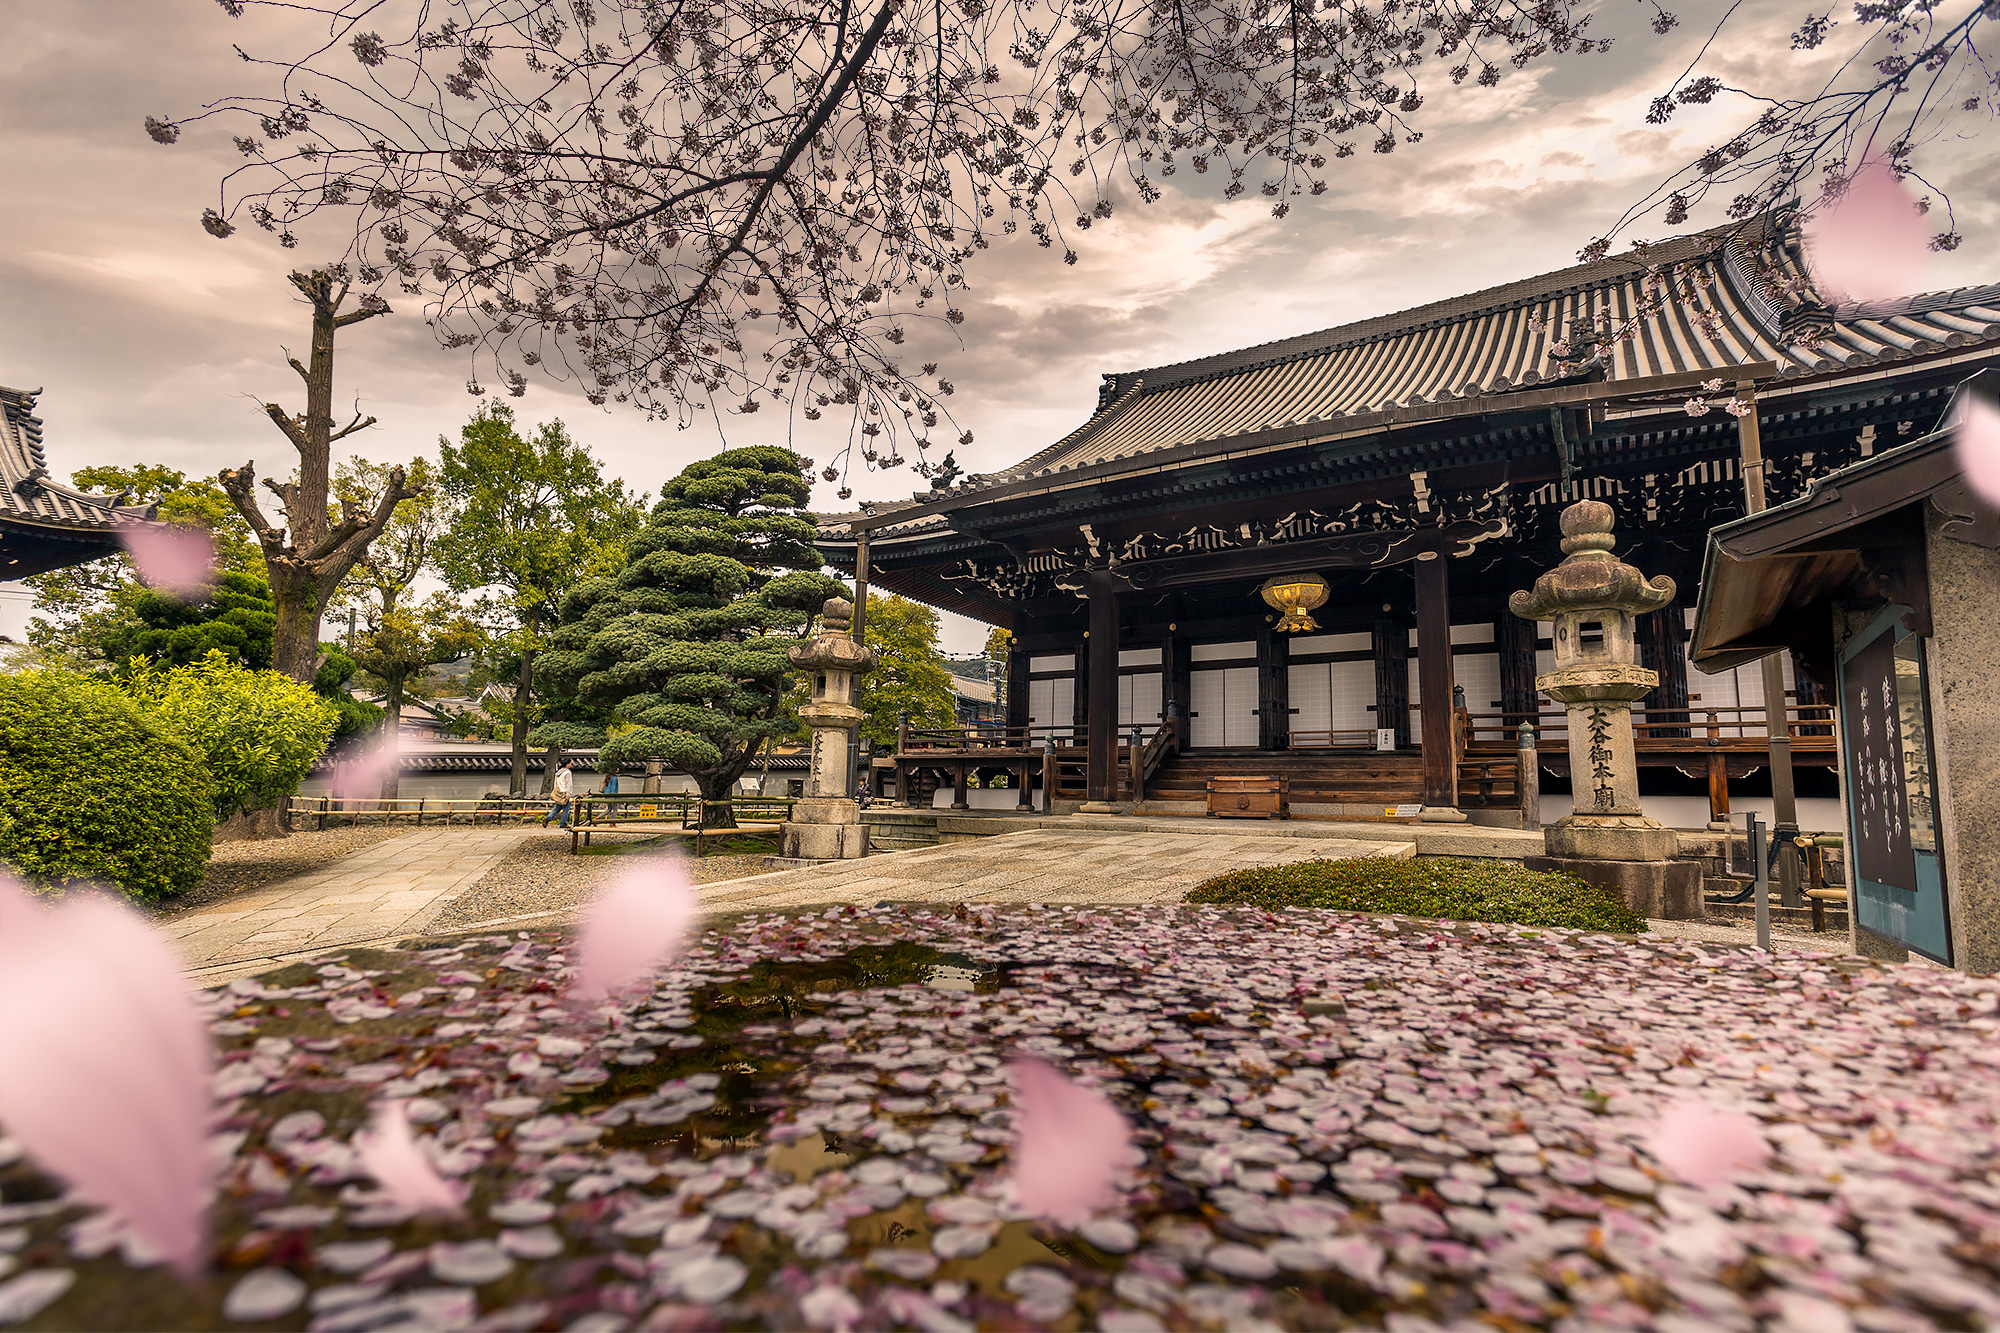 Temple in Kyoto surrounded by Sakura Flowers